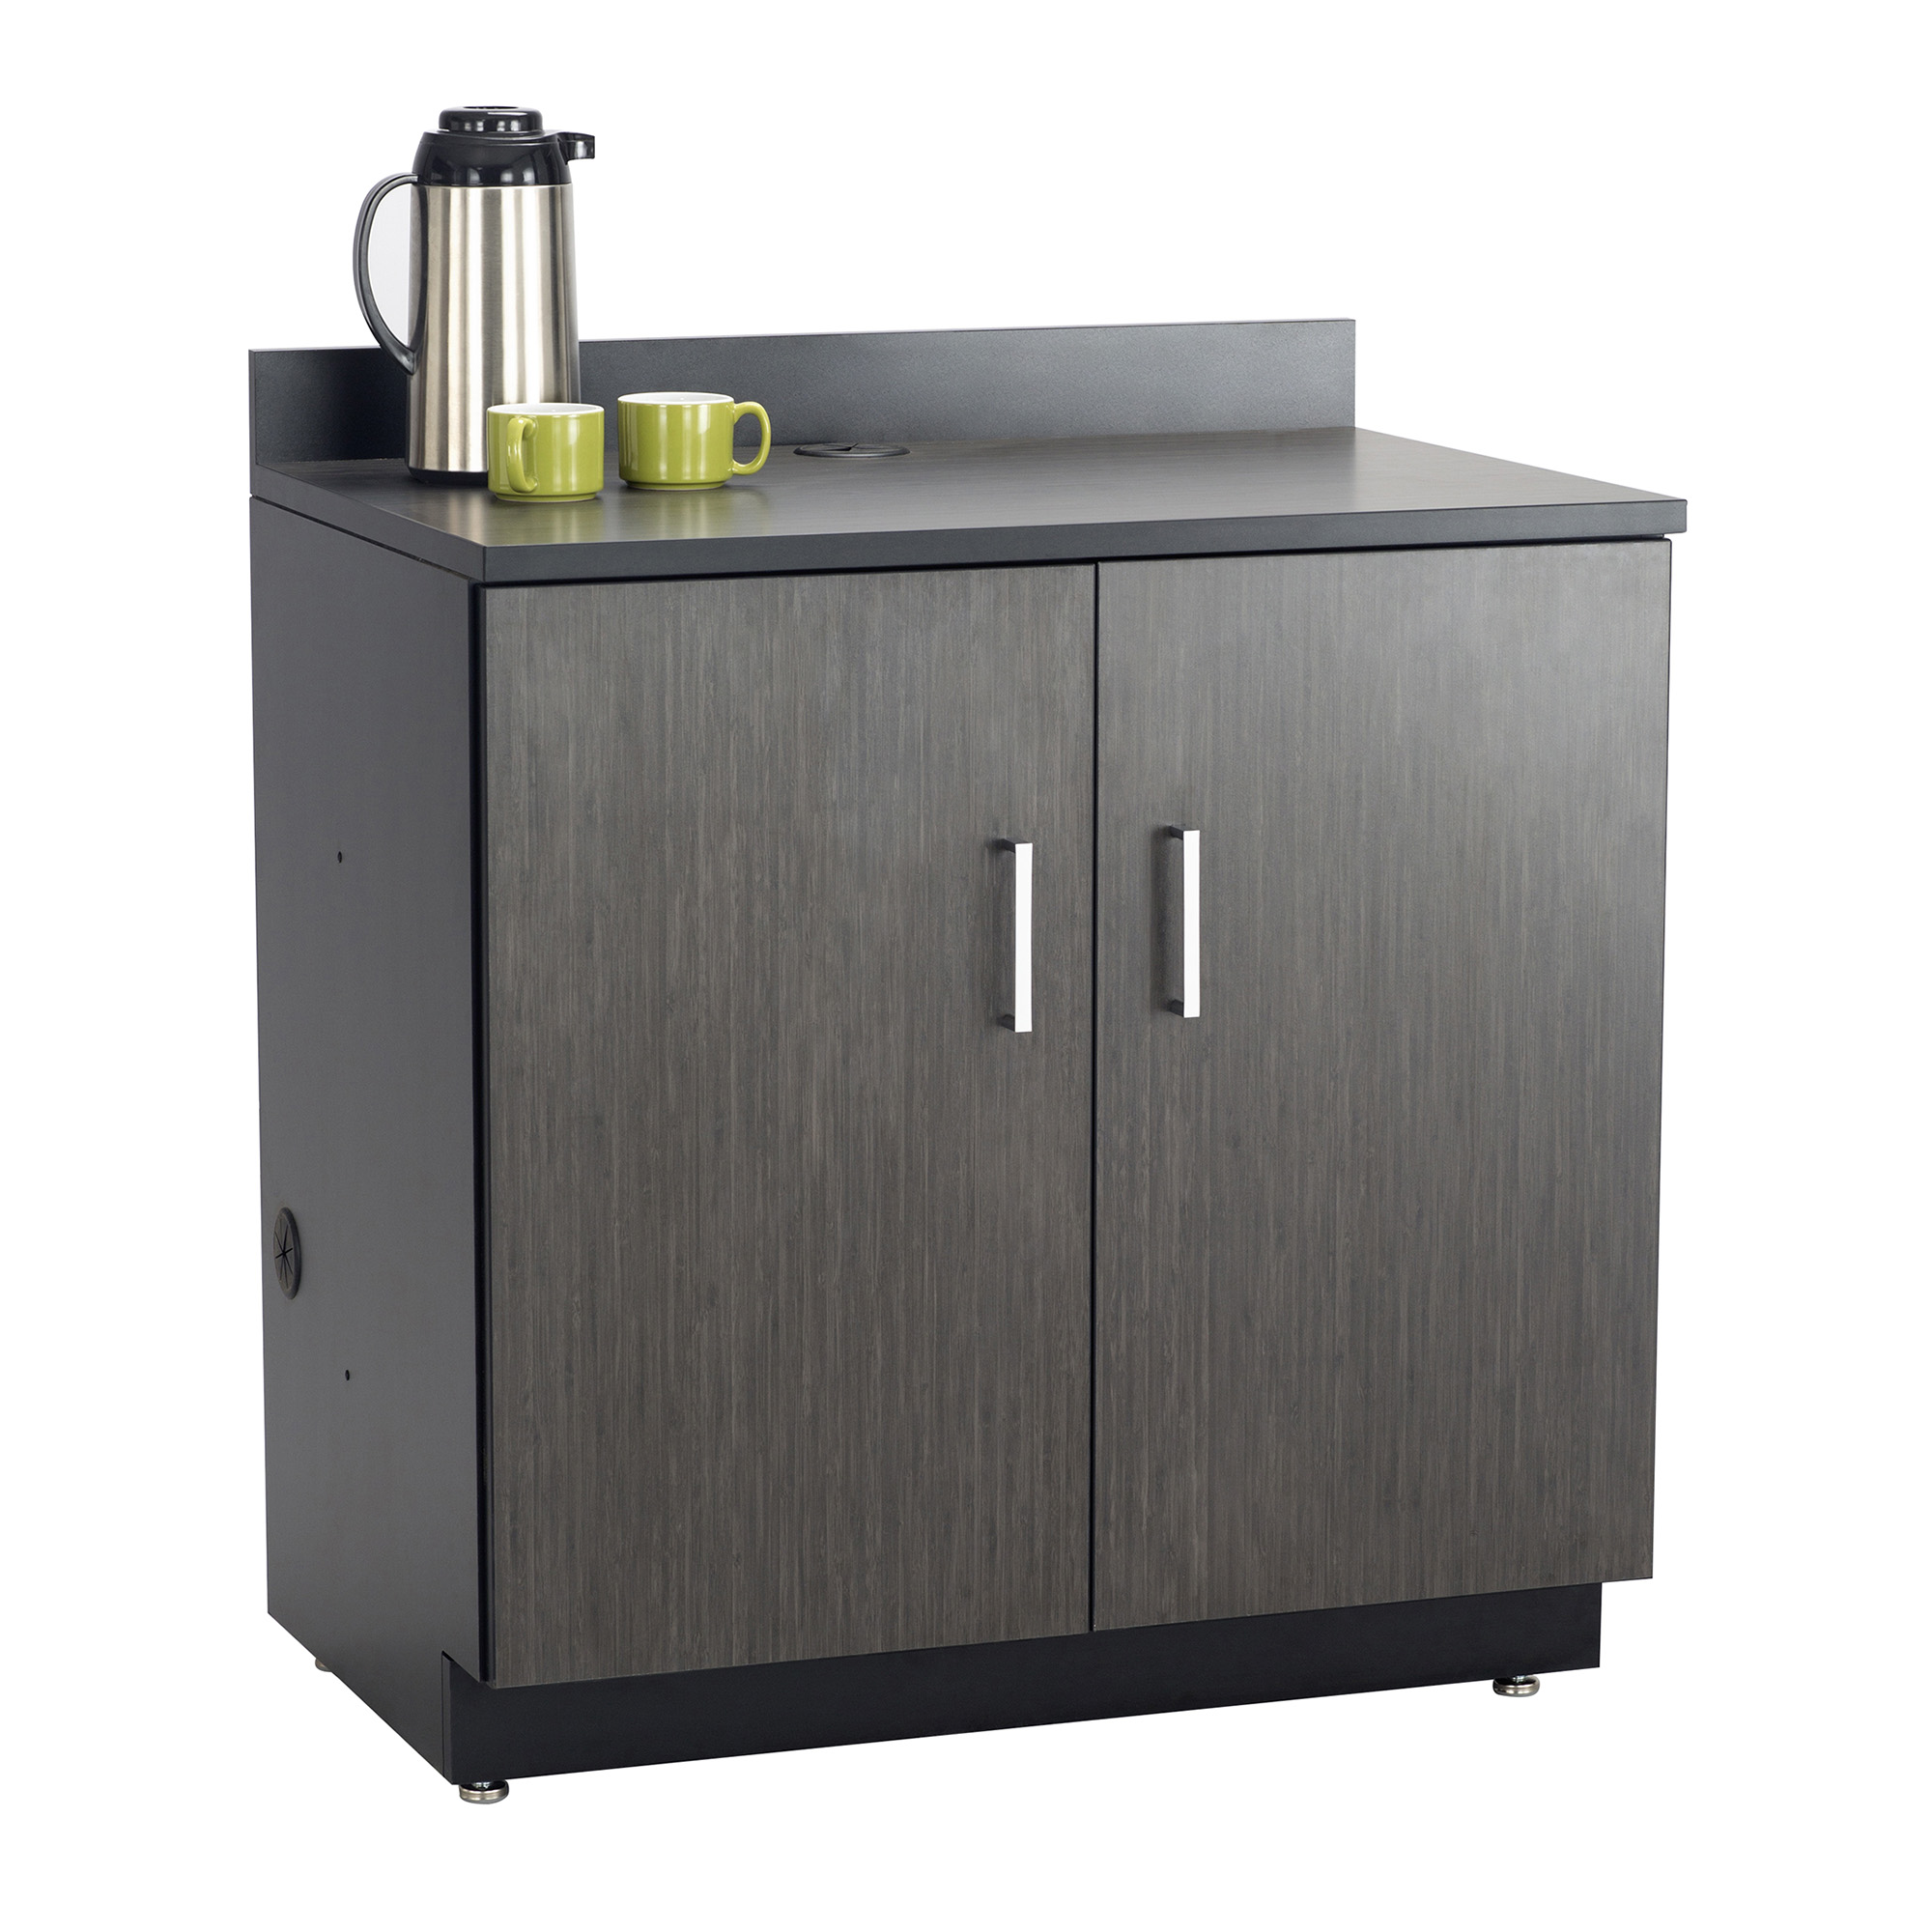 Details about    Safco Hospitality Base Cabinet Two Door Rustic  Slate/Mahogany mrsp 1,100.00 